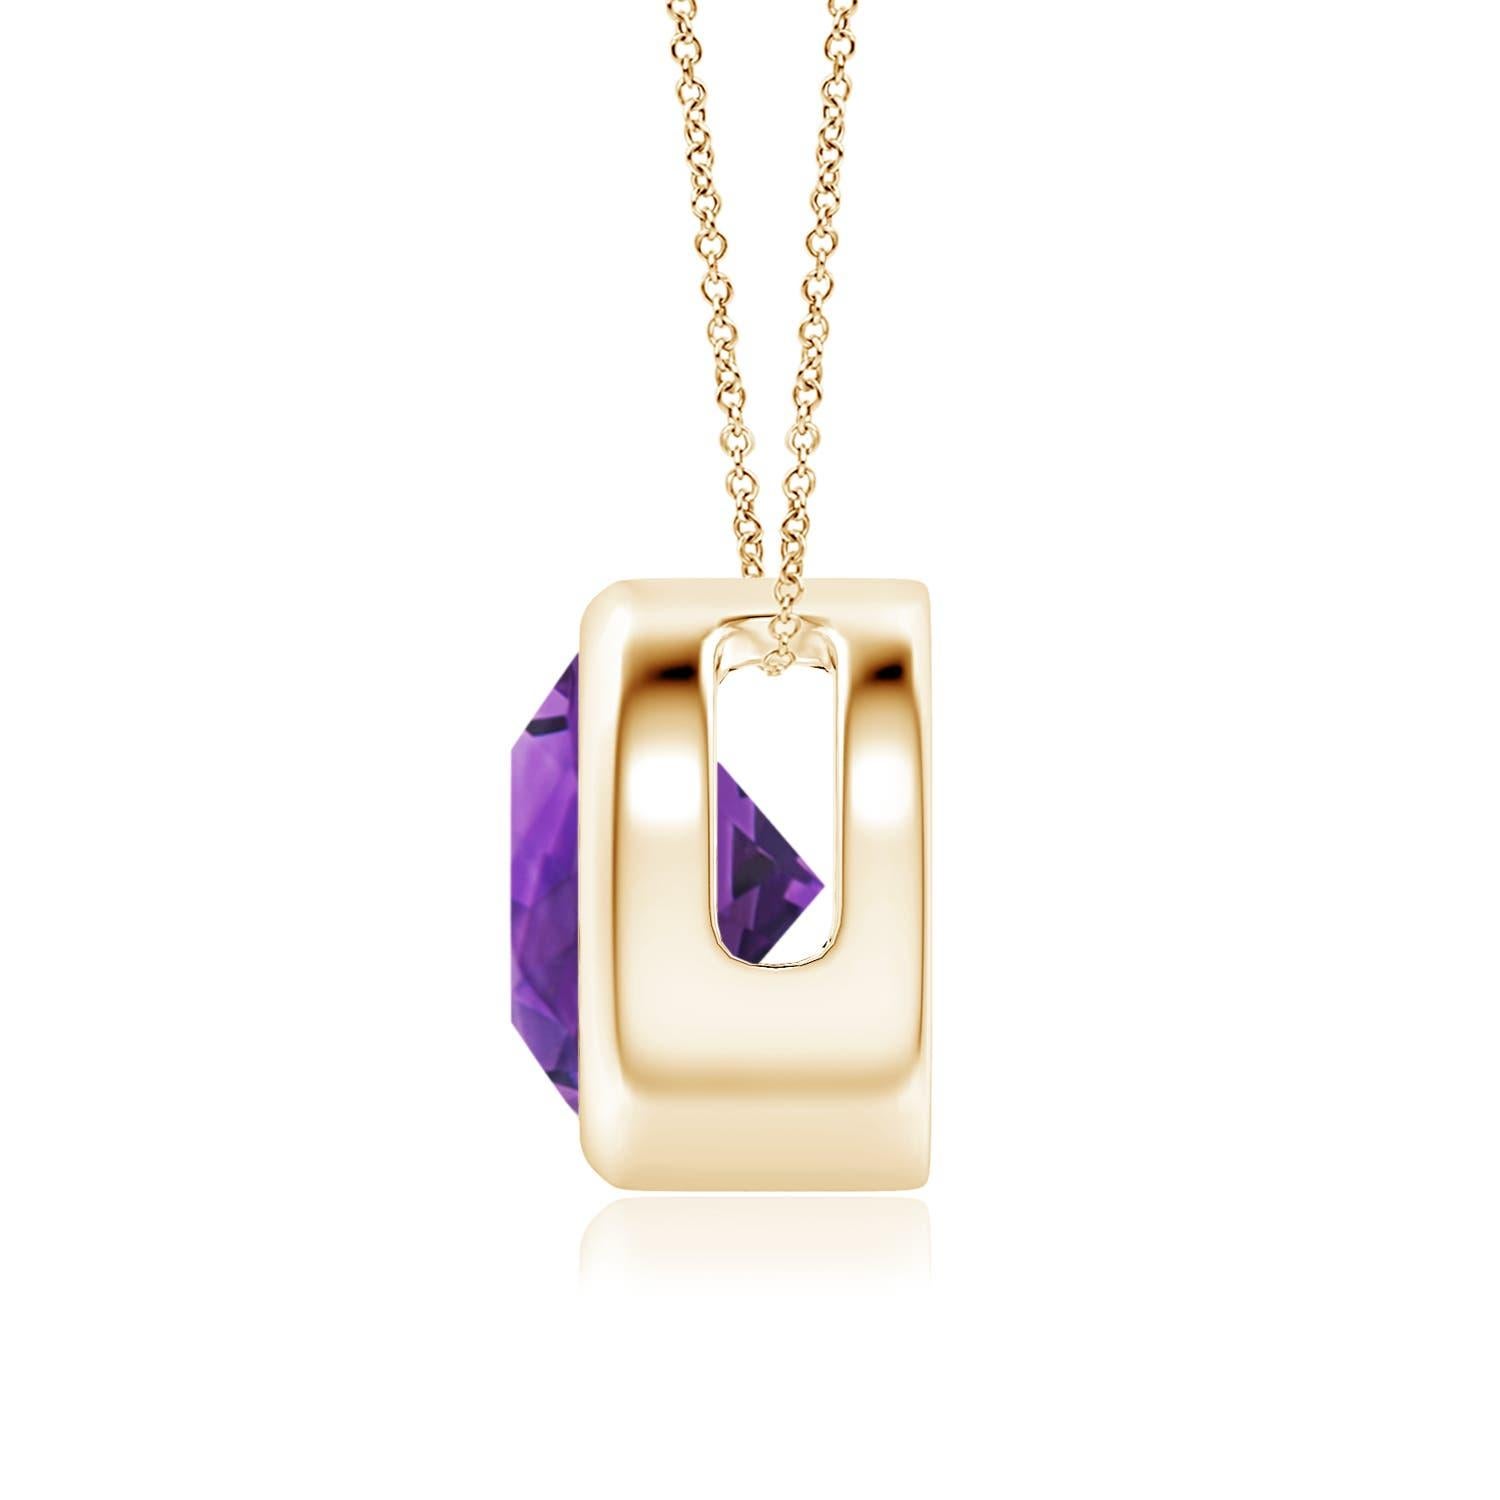 Modern Natural Bezel-Set Round 1.7ct Amethyst Solitaire Pendant in 14K Yellow Gold For Sale